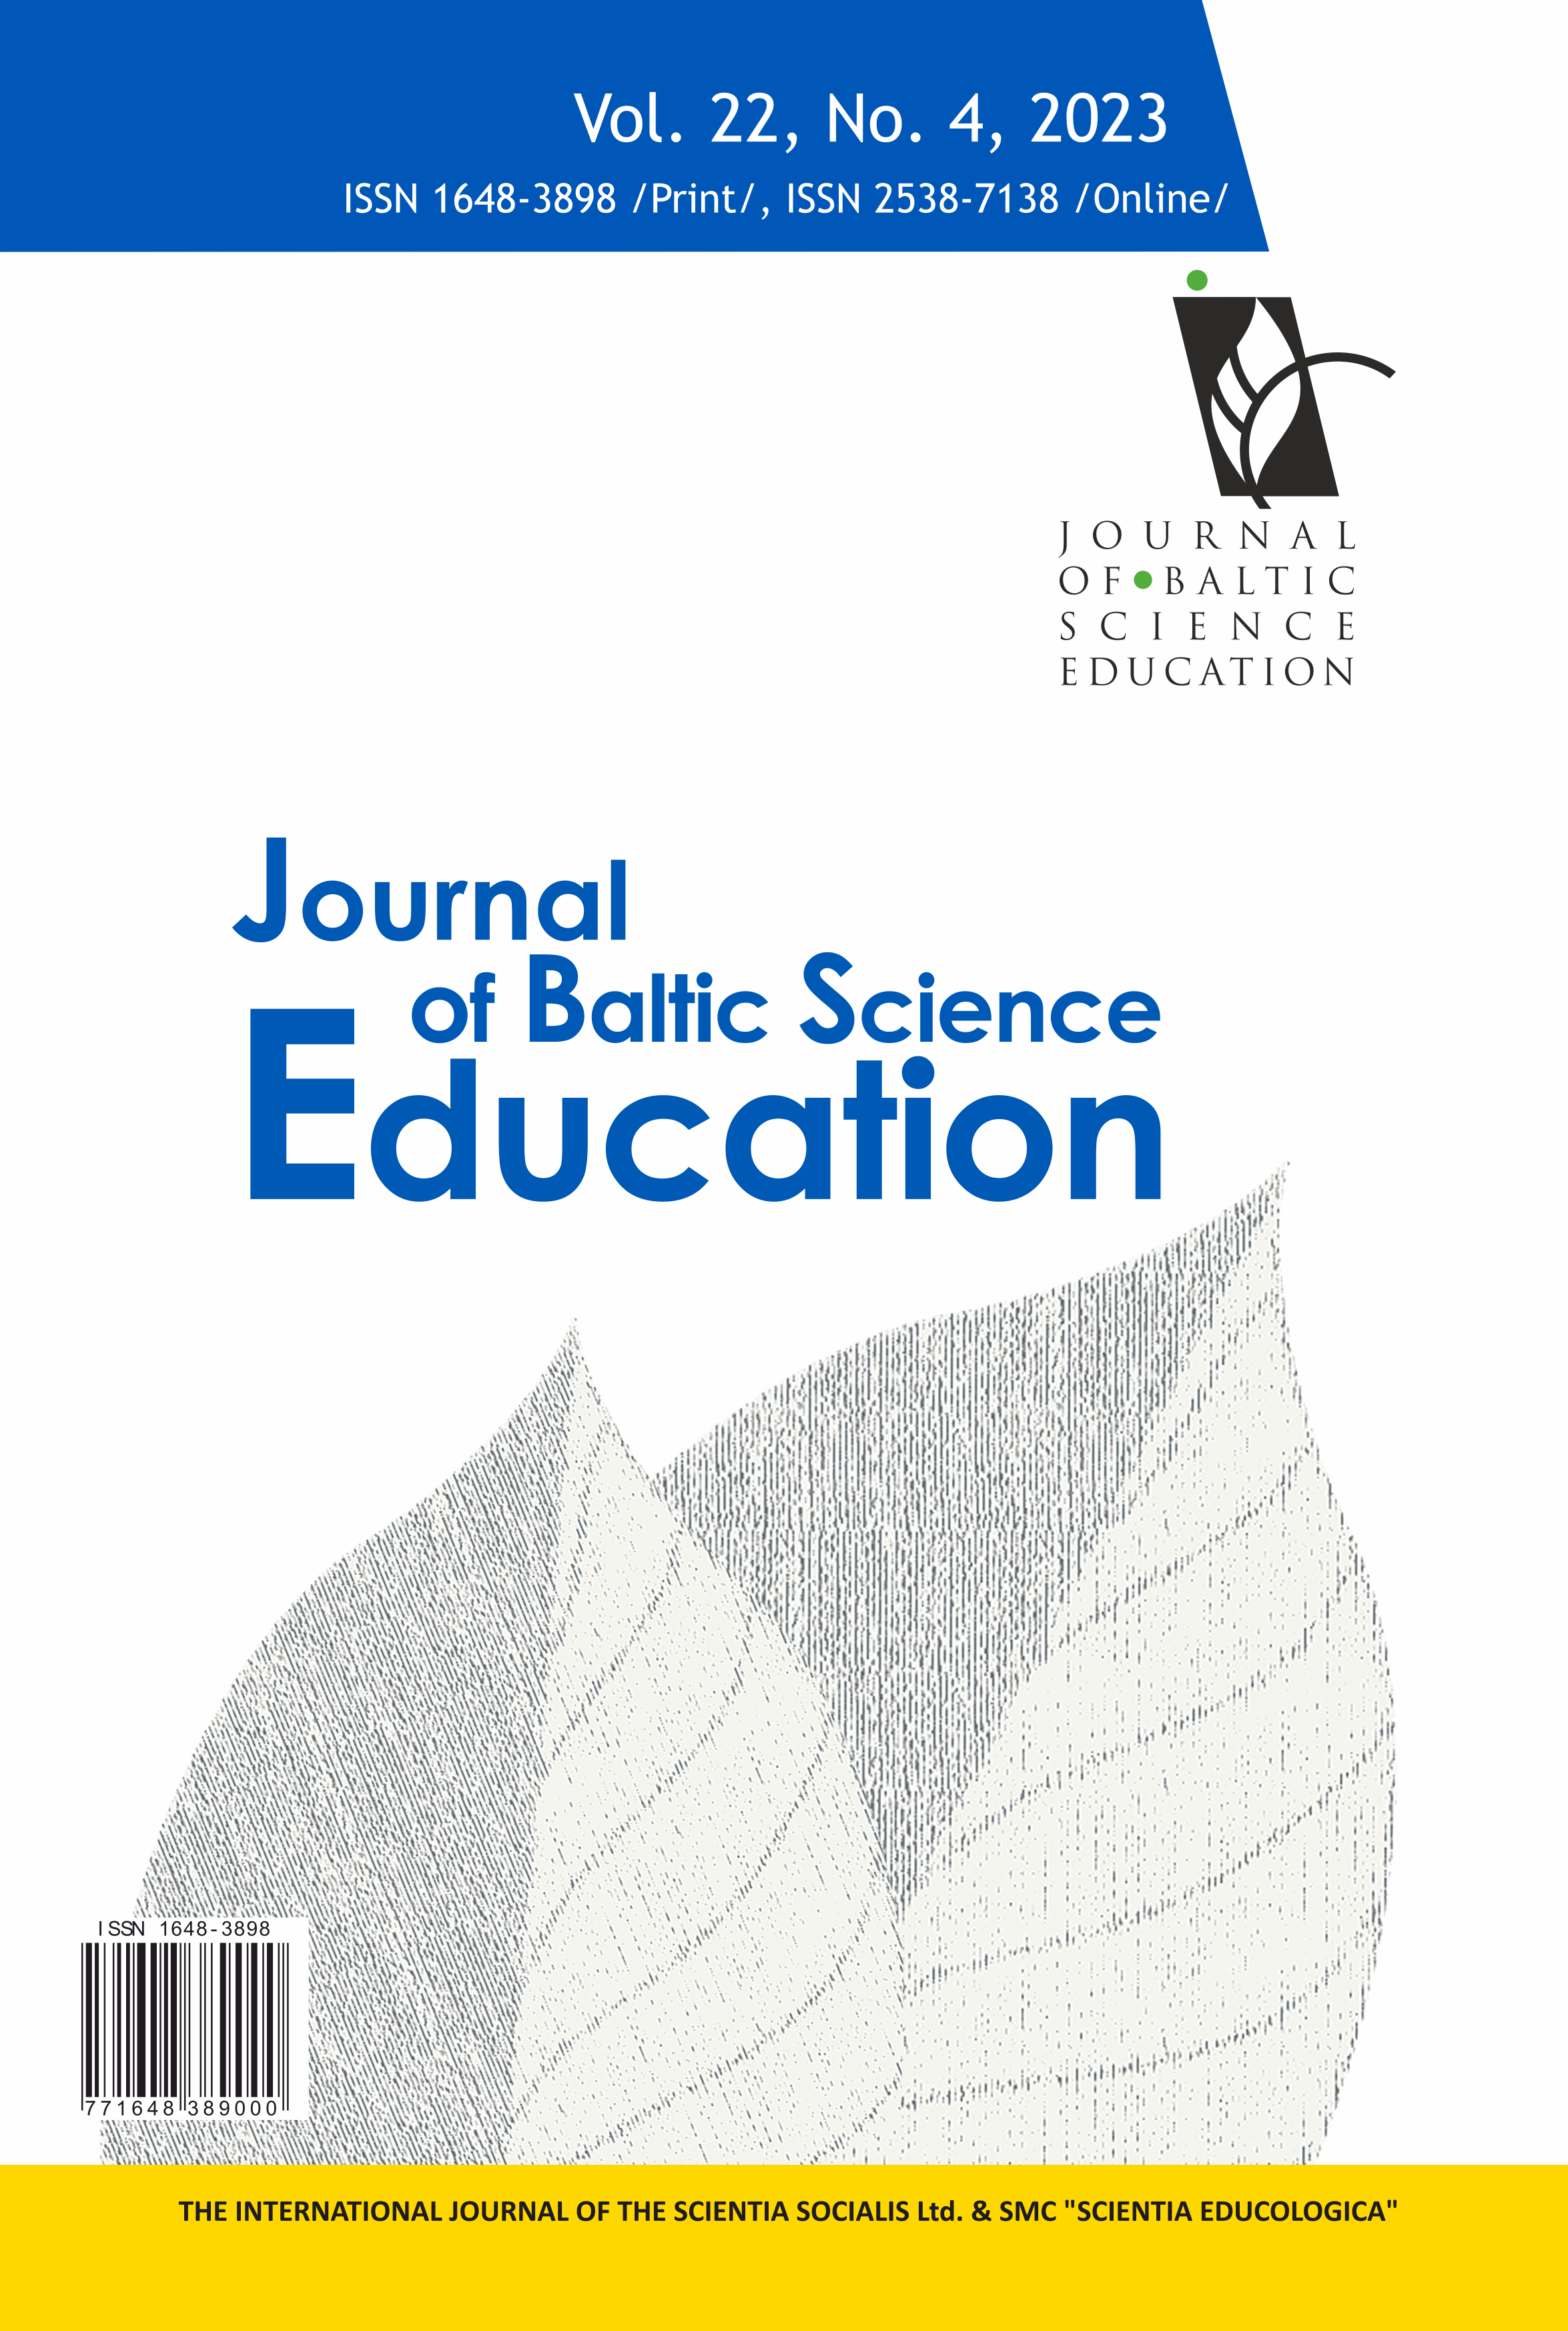 EFFECTS OF LEARNER-CENTERED INTERVENTIONS IN SCIENCE LEARNING: COMPARING EYE MOVEMENT IN EYE MOVEMENT MODELING EXAMPLES AND PROMPTING